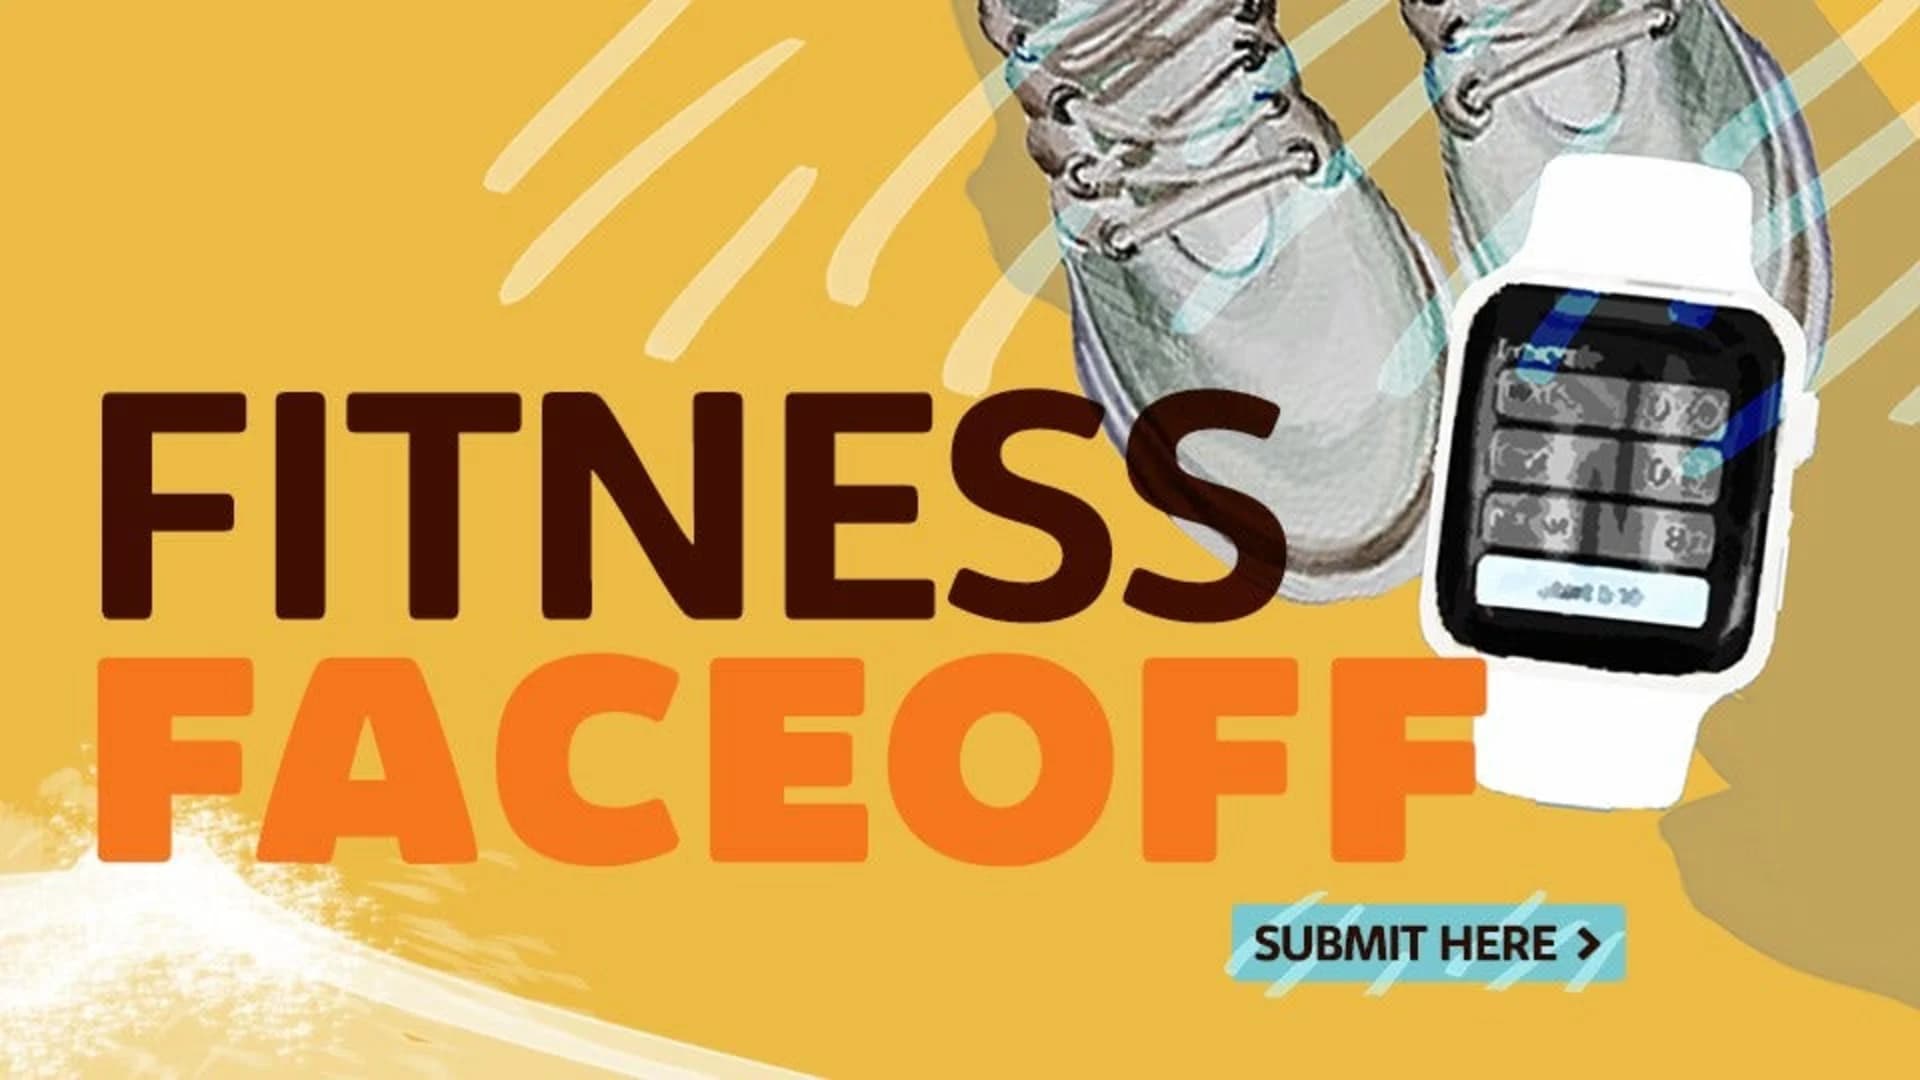 Fitness Face-off crosses the finish line on Long Island